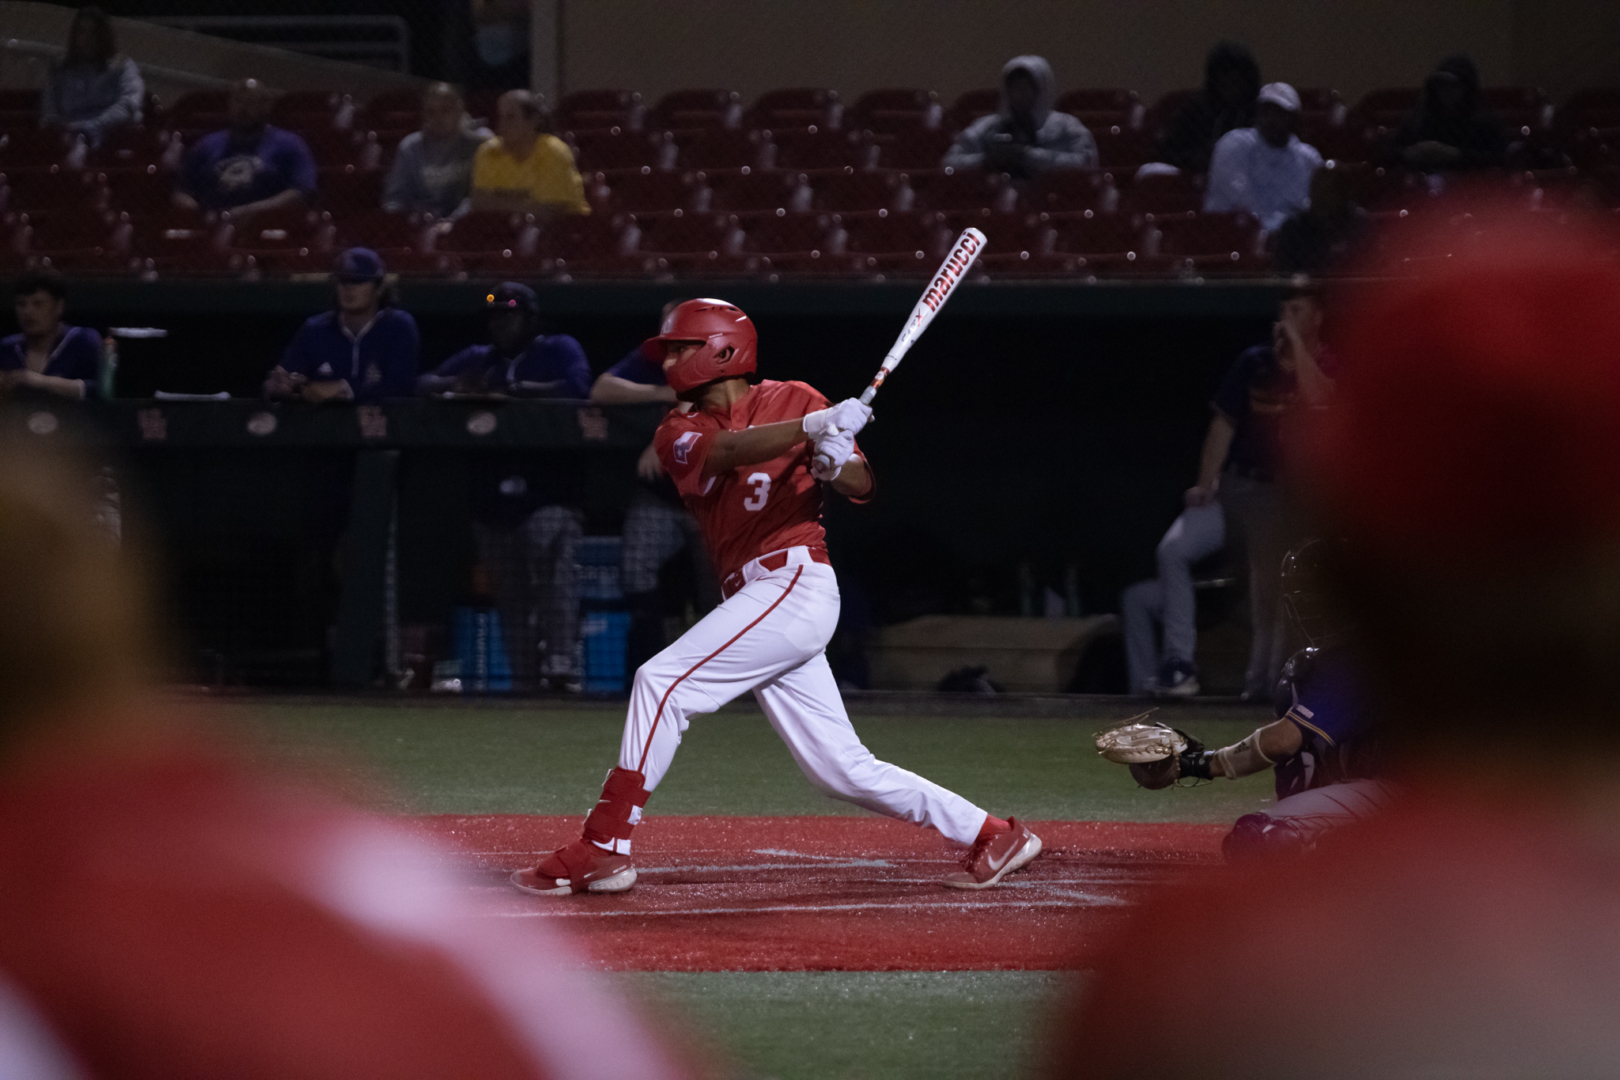 The bats were hot for UH baseball in its rout of Prairie View A&M on Tuesday night at Schroeder Park. | Raphael Fernandez/The Cougar